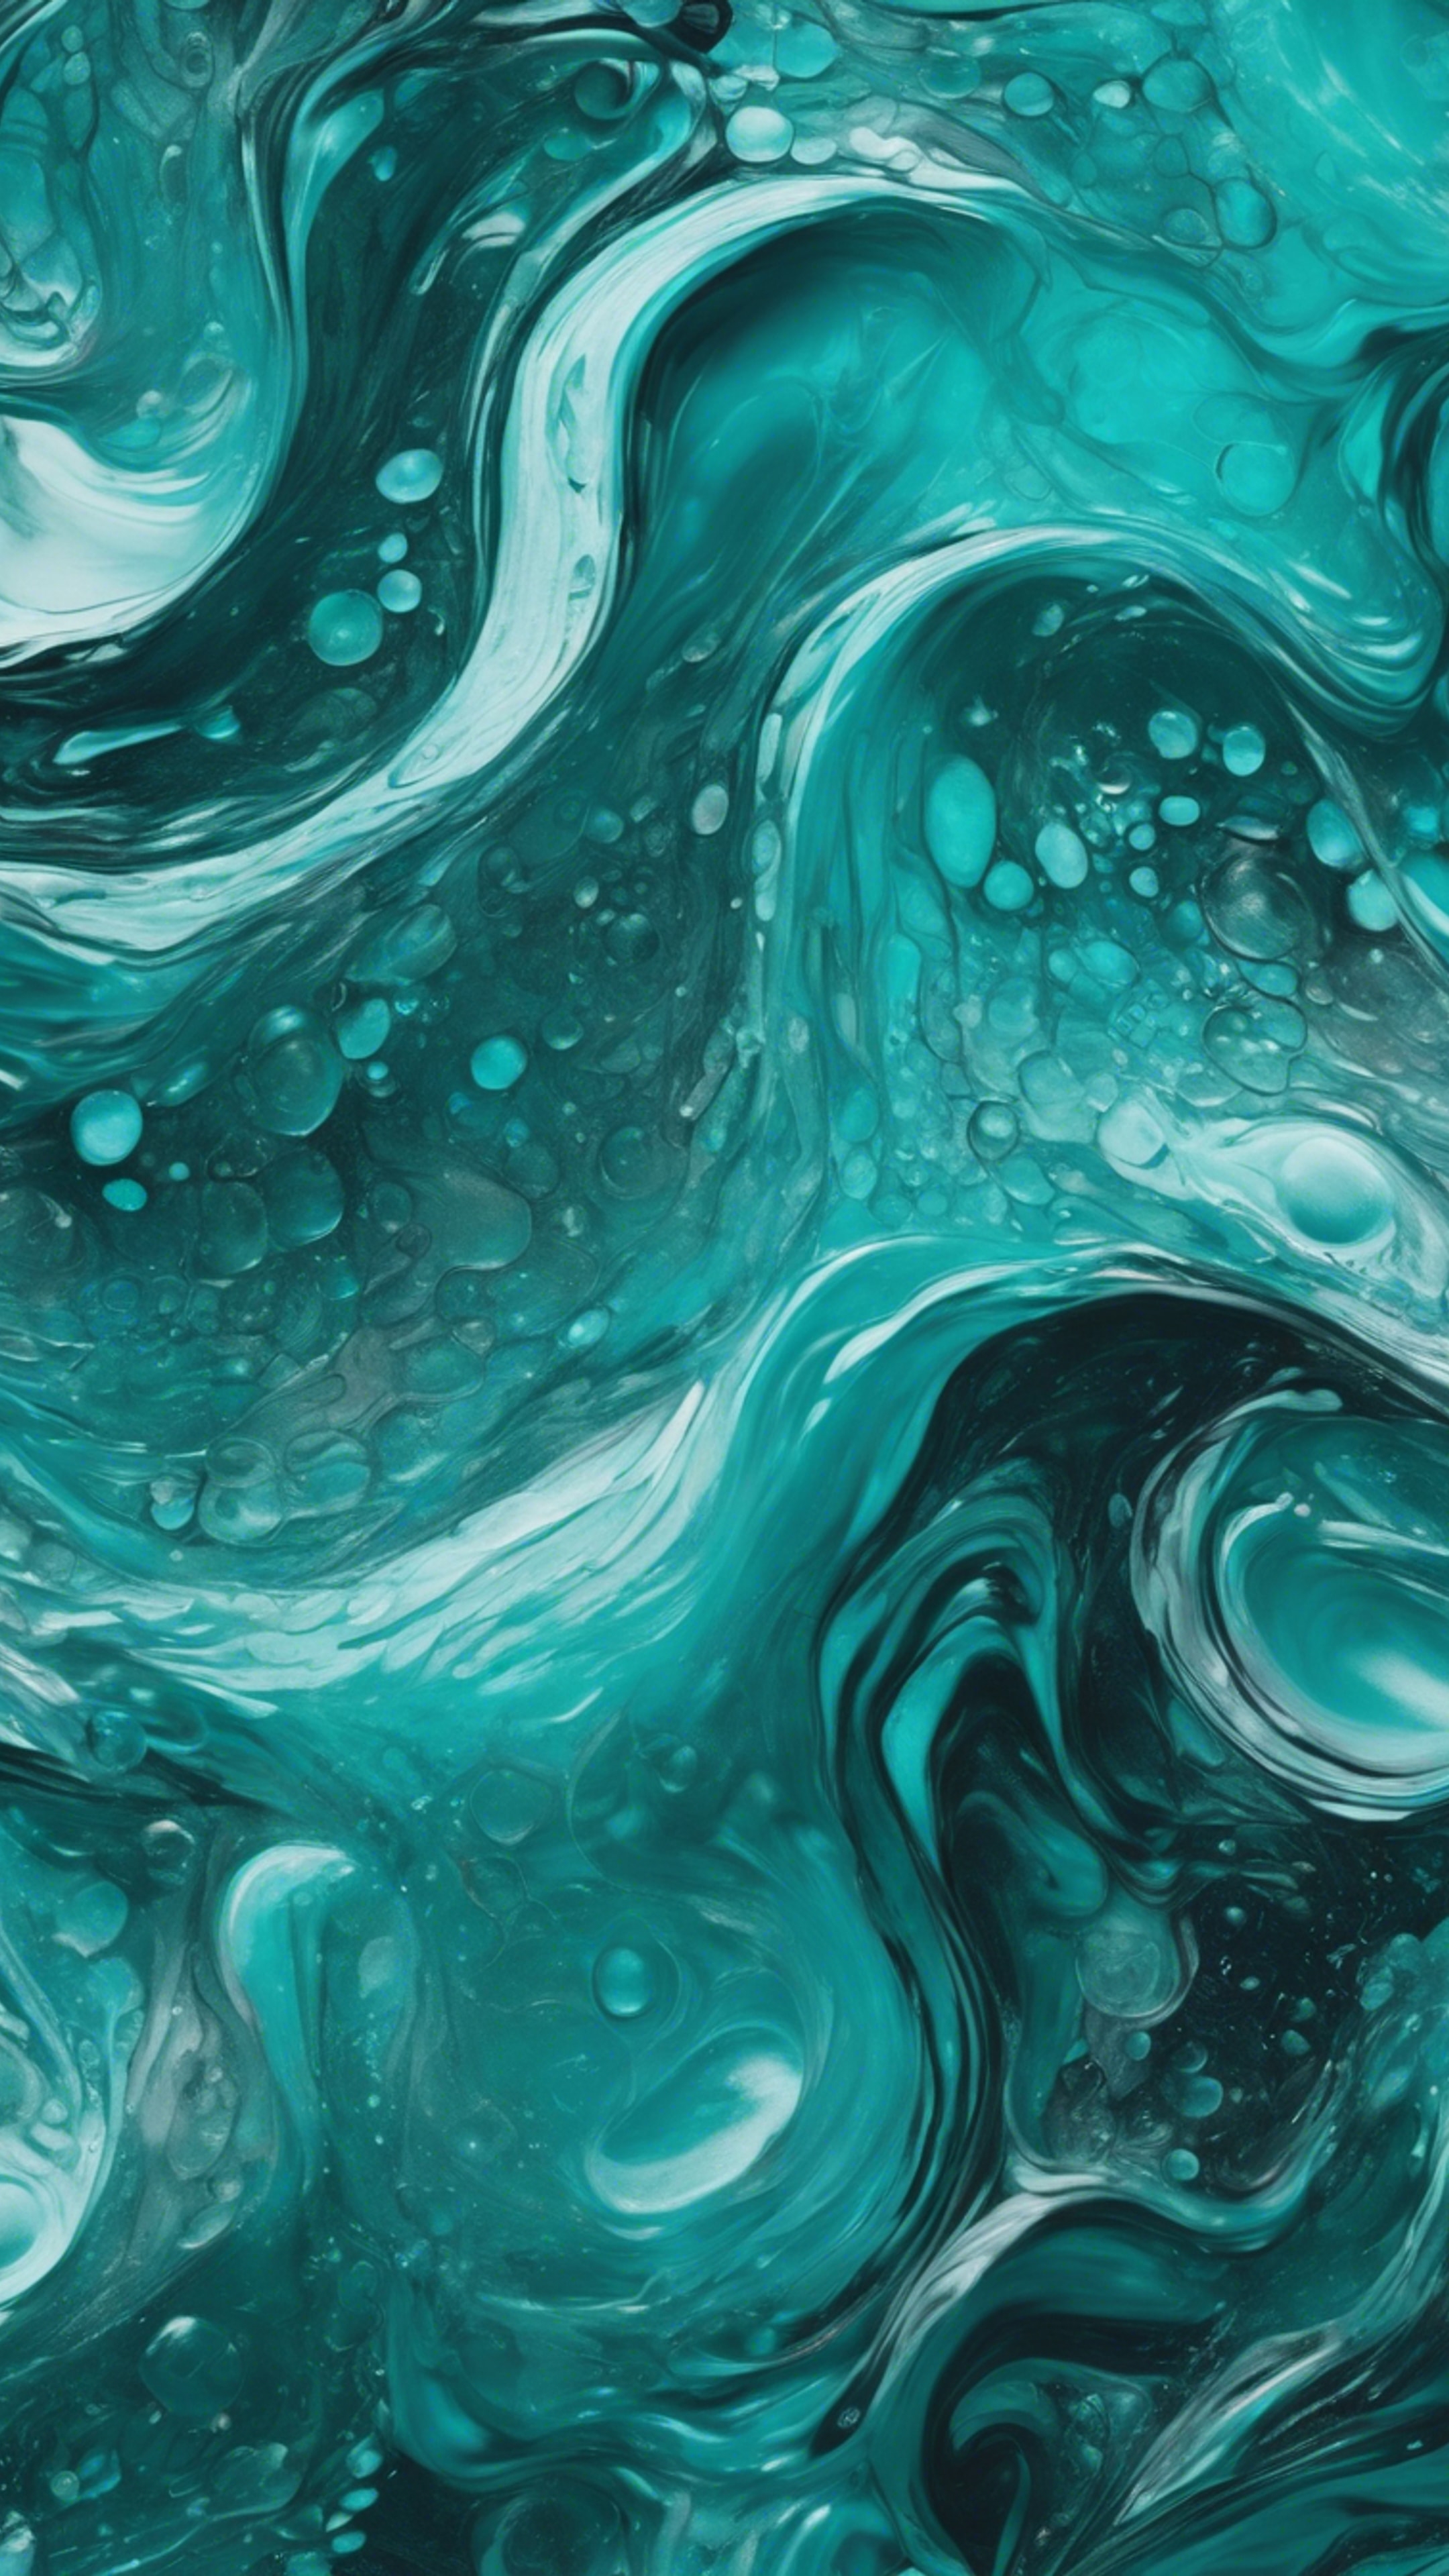 Abstract painting with swirling waves of shades of cool teal. Tapeta na zeď[053c1b1ade8044ef8a45]